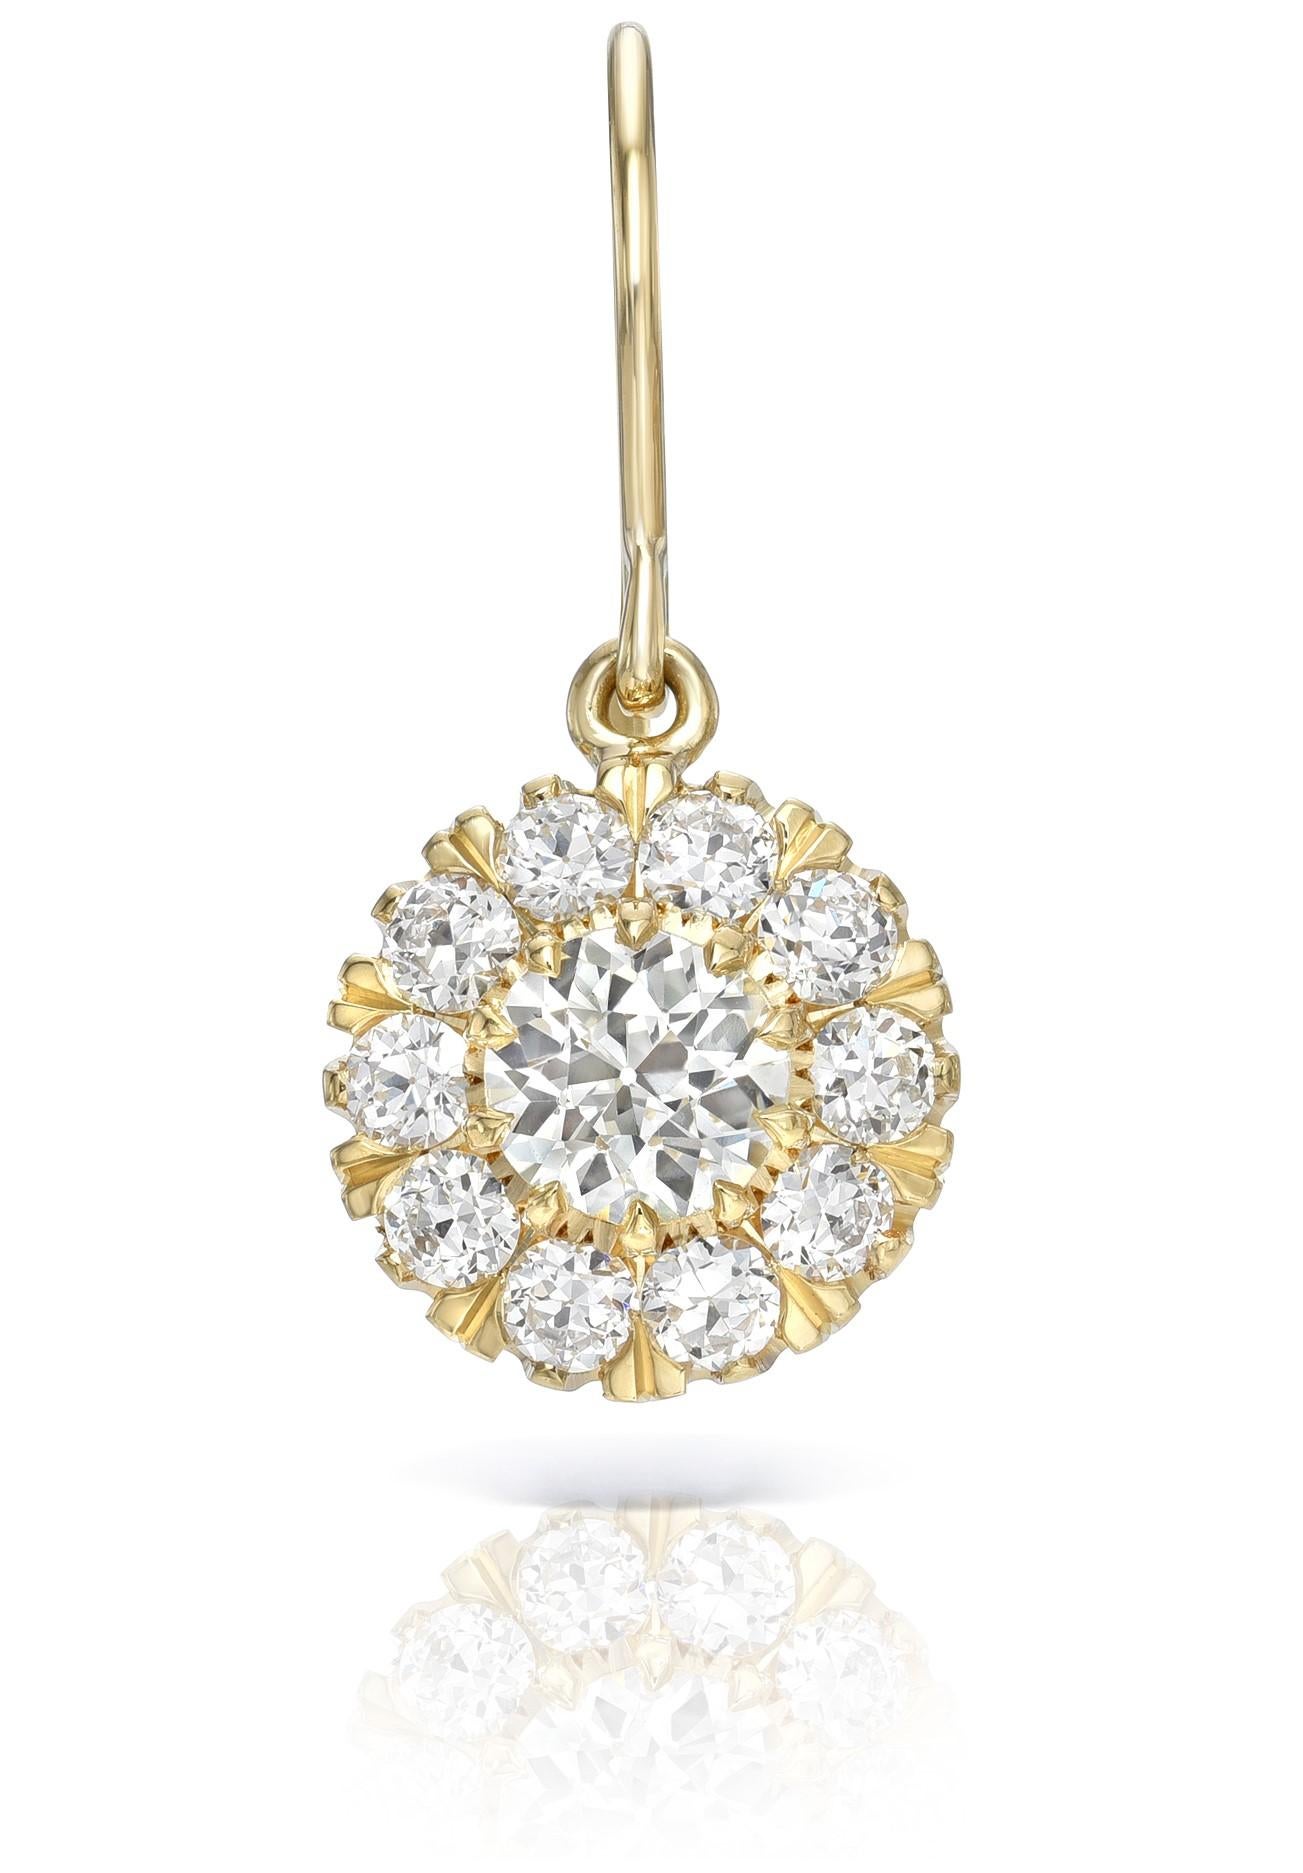 1.15ctw L-M/VS1 GIA certified old European cut diamonds with 1.11ctw old European cut accent diamonds prong set in handcrafted 18K yellow gold drop earrings.